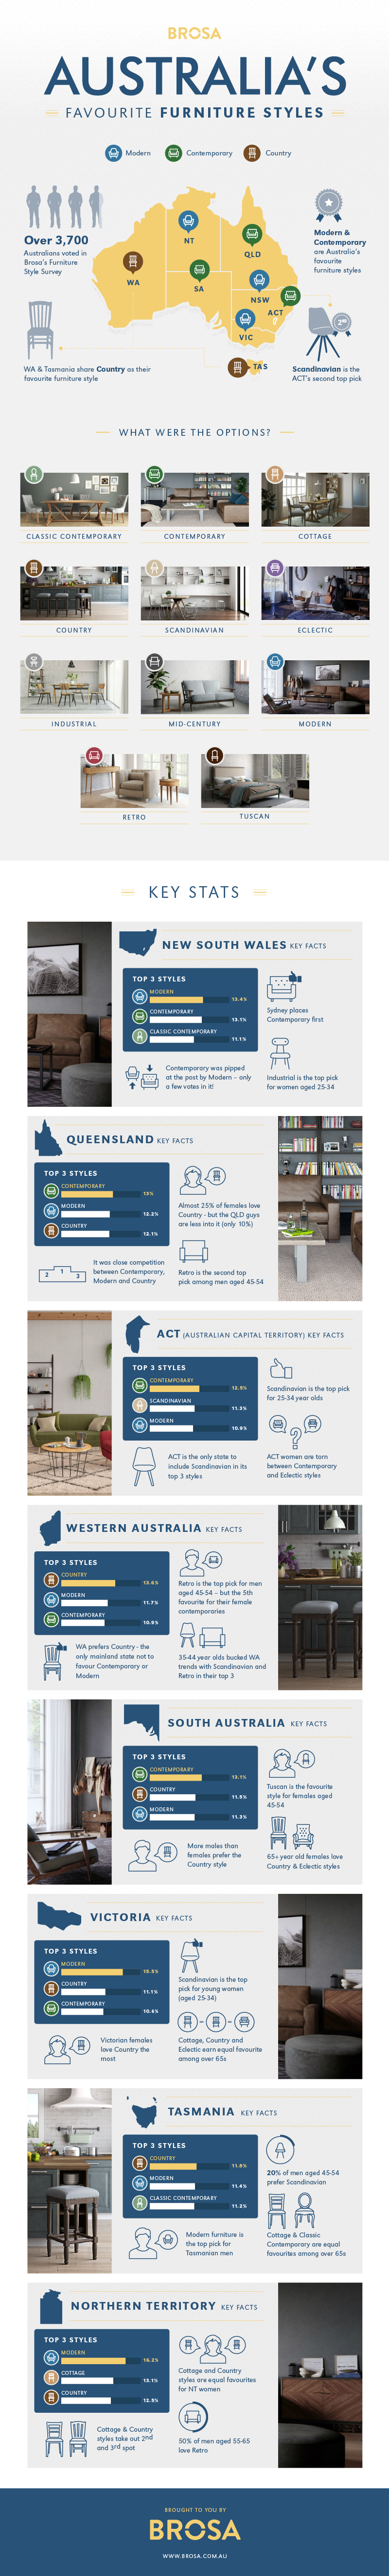 Infographic for Australia's Favorite Furniture Style